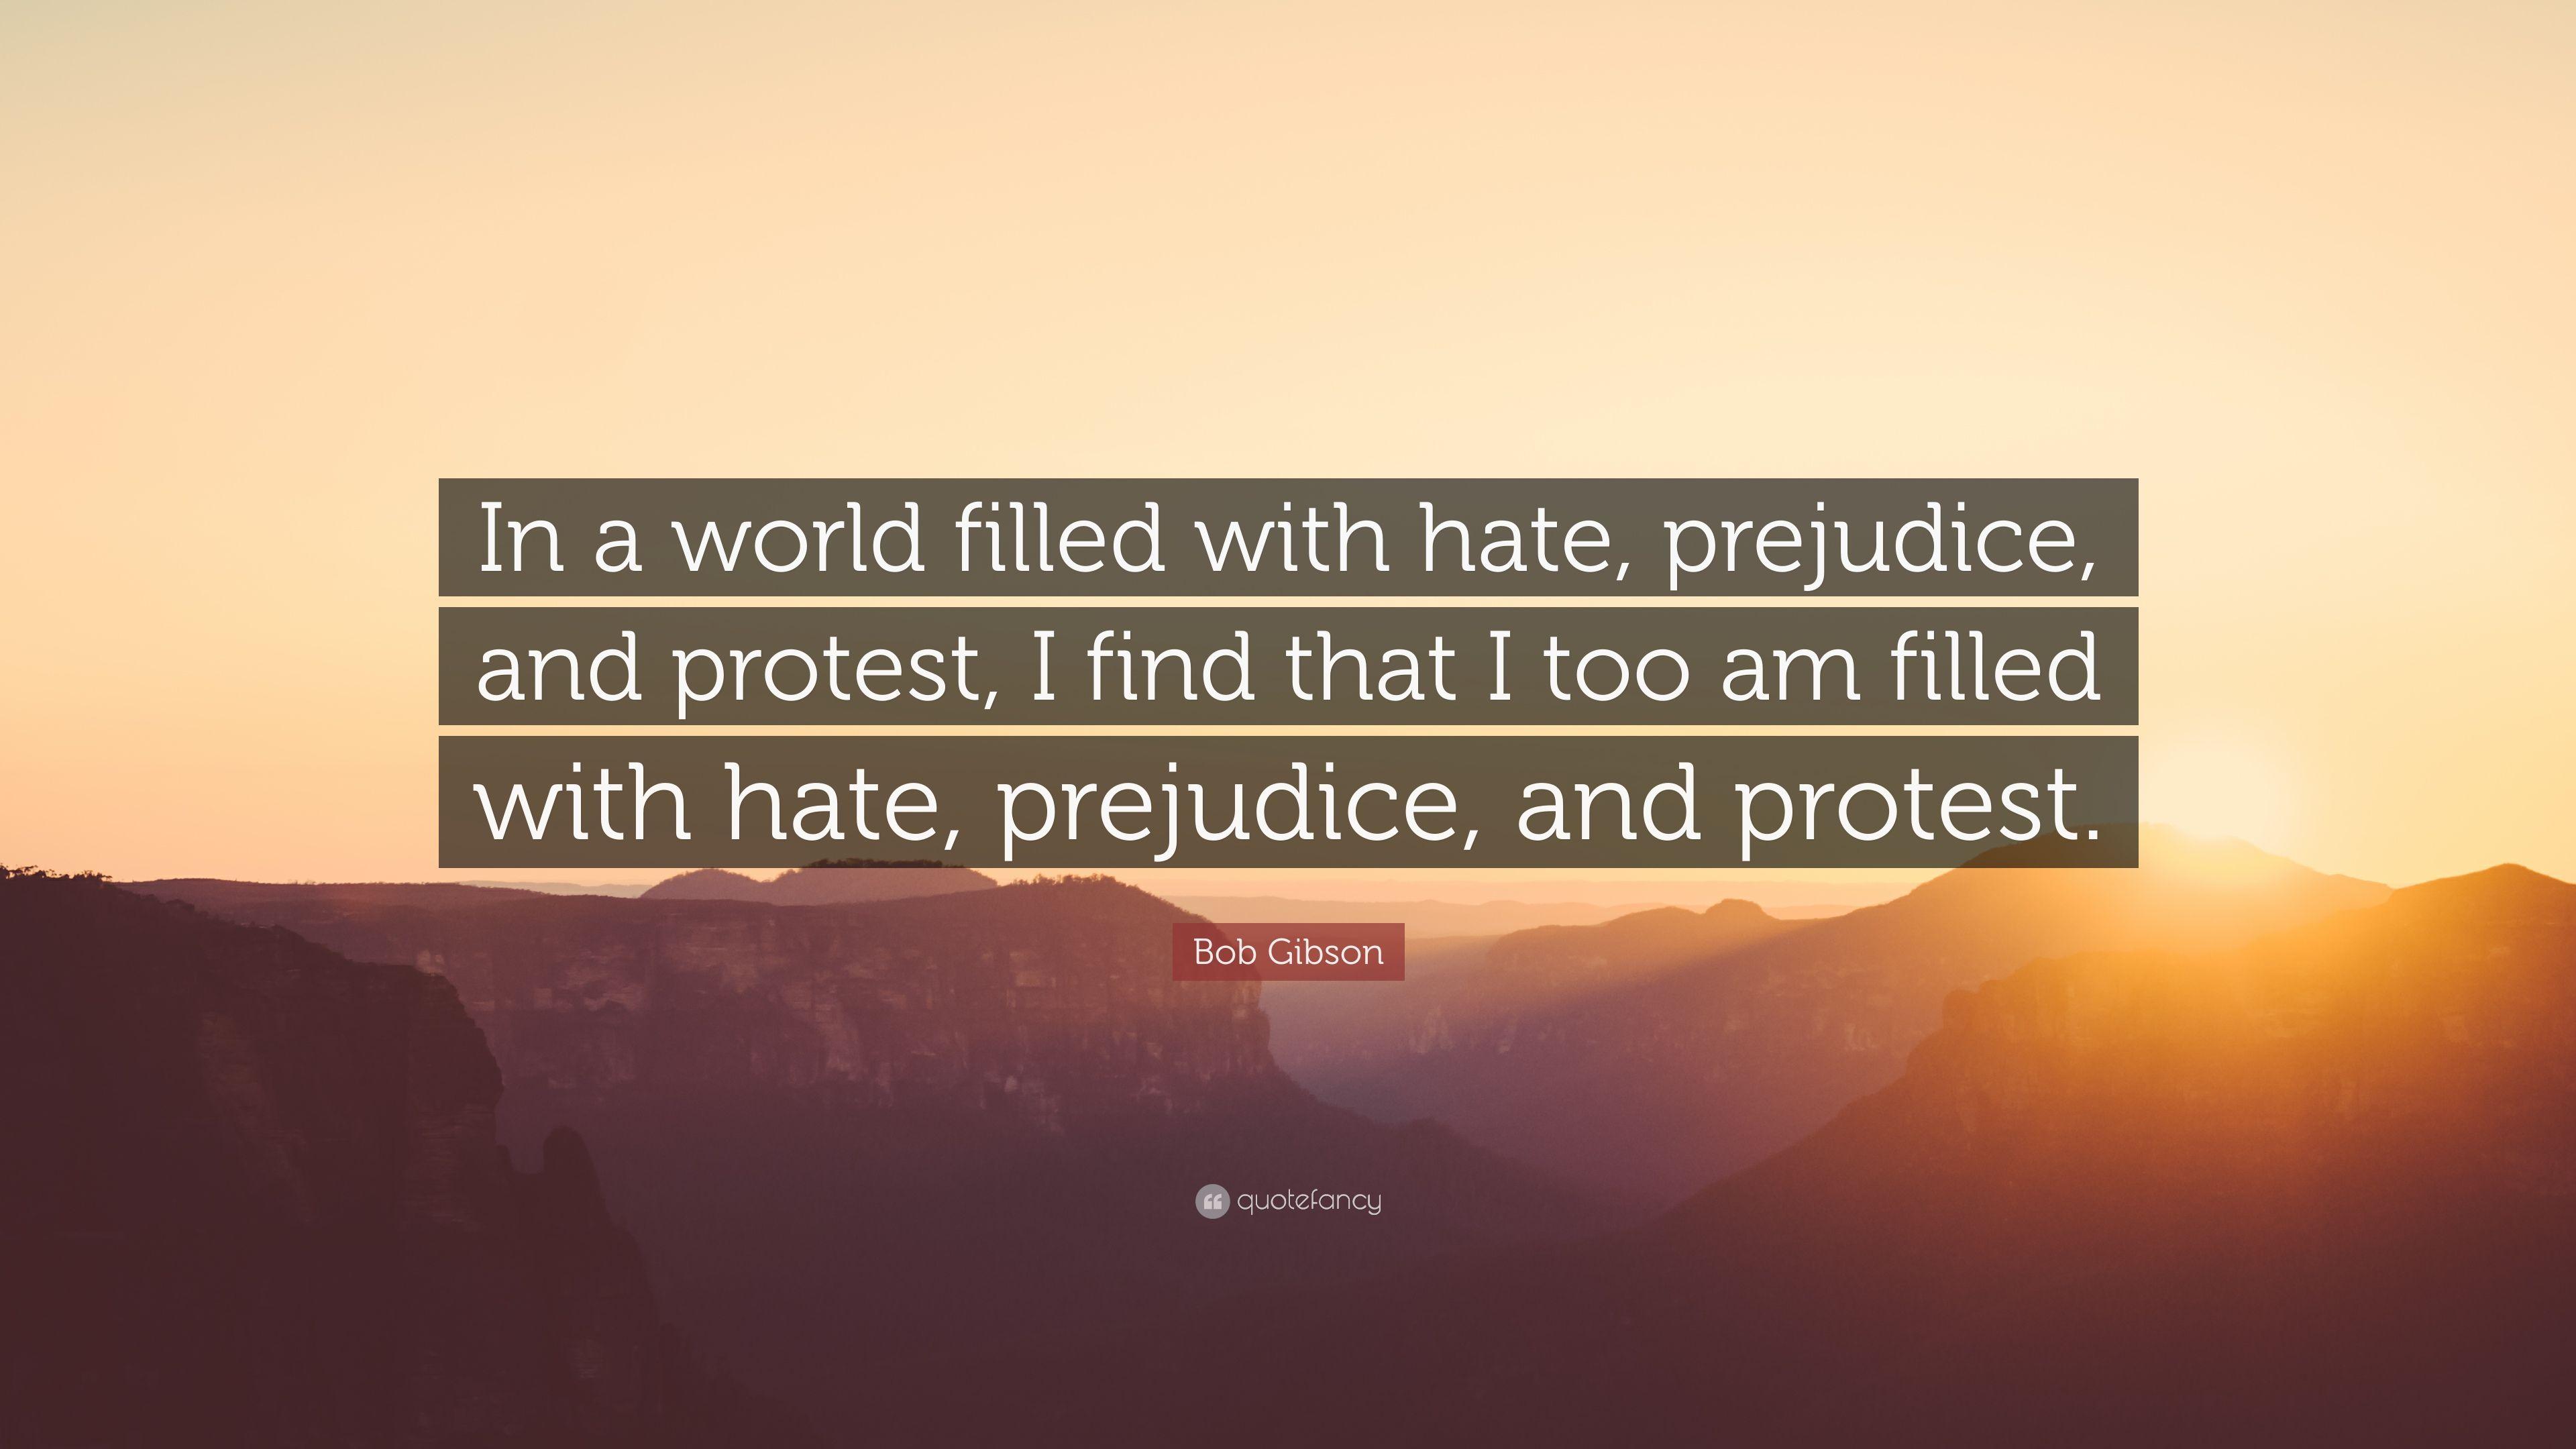 Bob Gibson Quote: “In a world filled with hate, prejudice